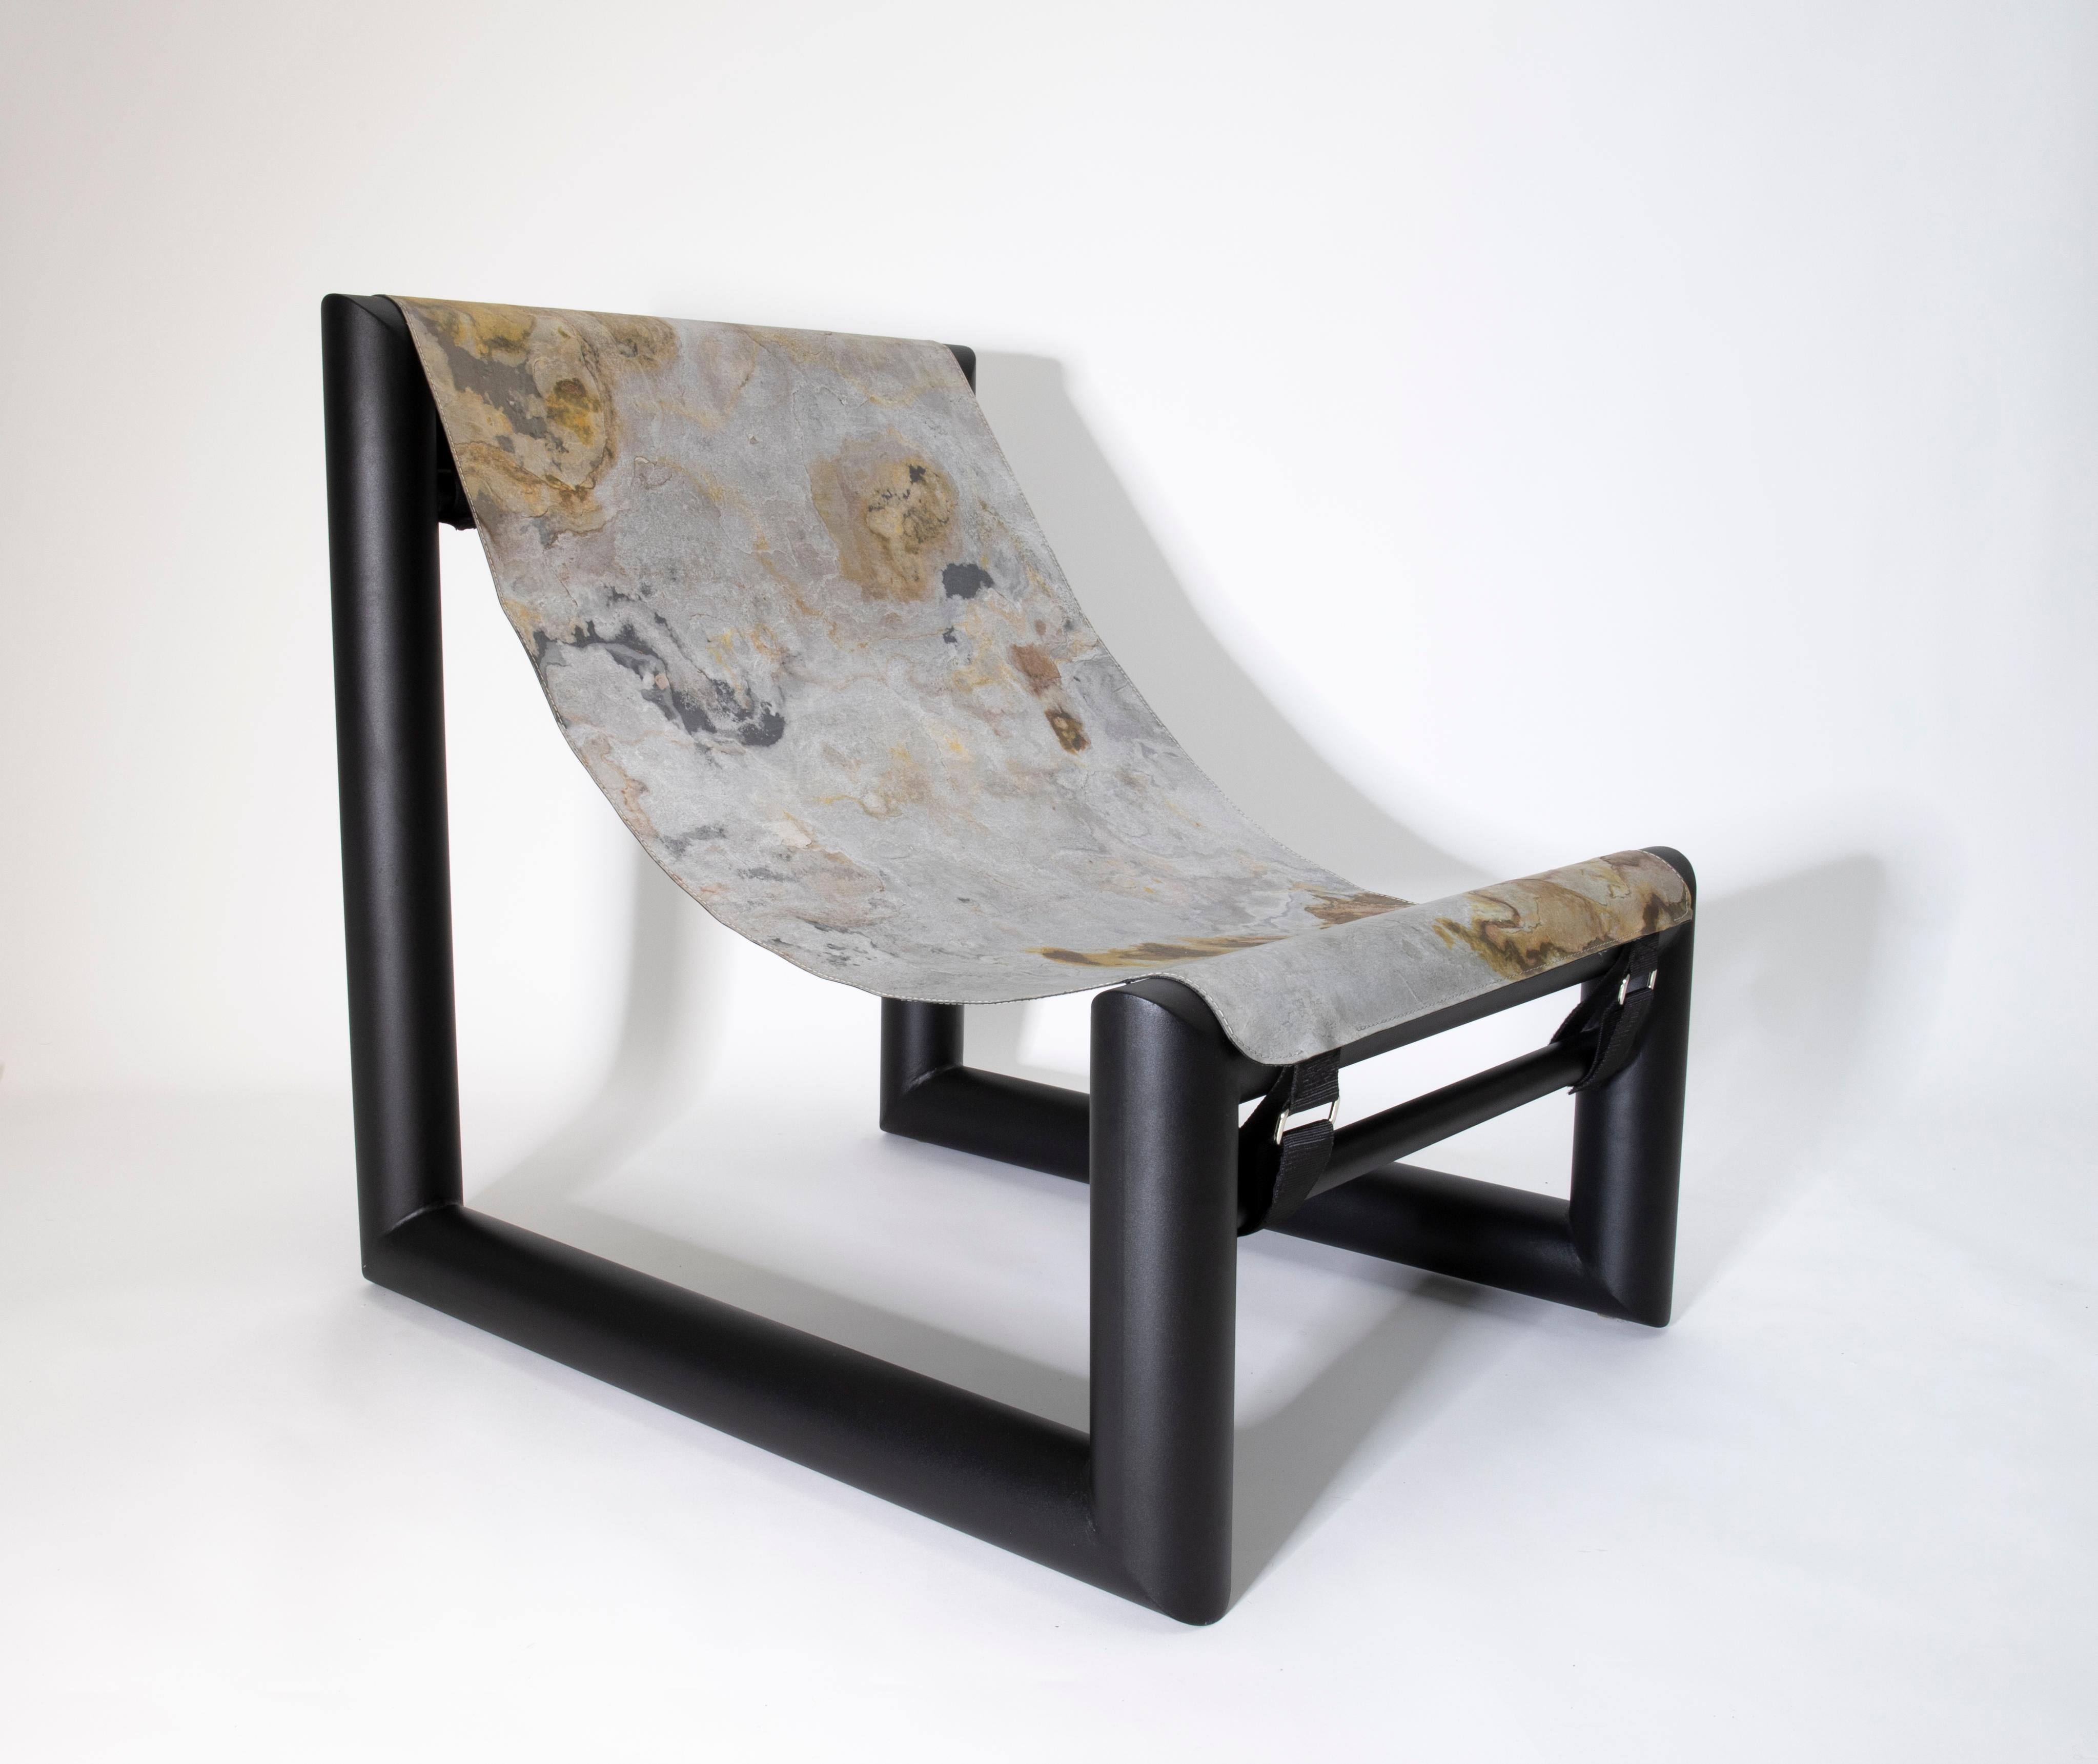 Bau rouge is a lounge chair inspired by the warm and long layers of rocks along the shores of the Mediterranean sea, on the «Côte d’Azur» and on which it is quite pleasant to lay down after a fresh bath.
The chair is produced in limited edition of